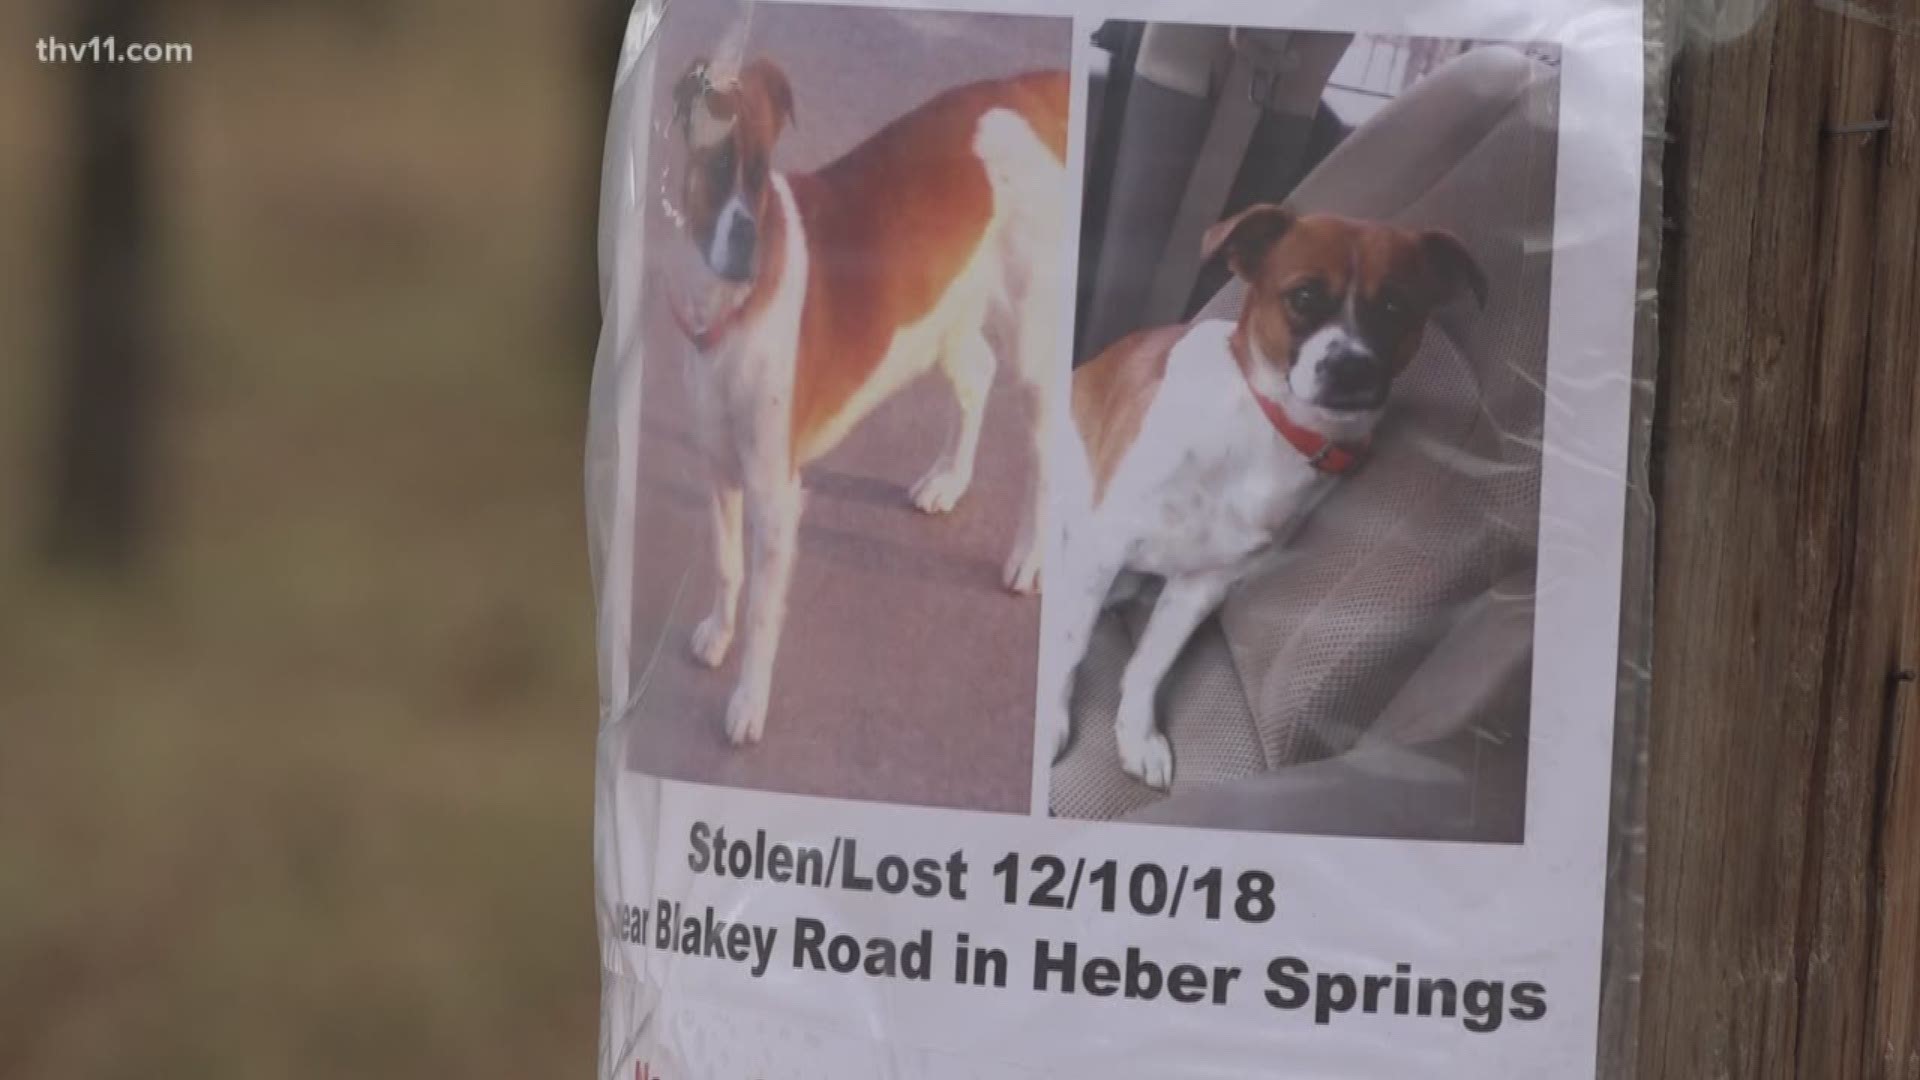 In just a few weeks, at least six dogs have not returned home to their homes in the Heber Springs area of Cleburne County.